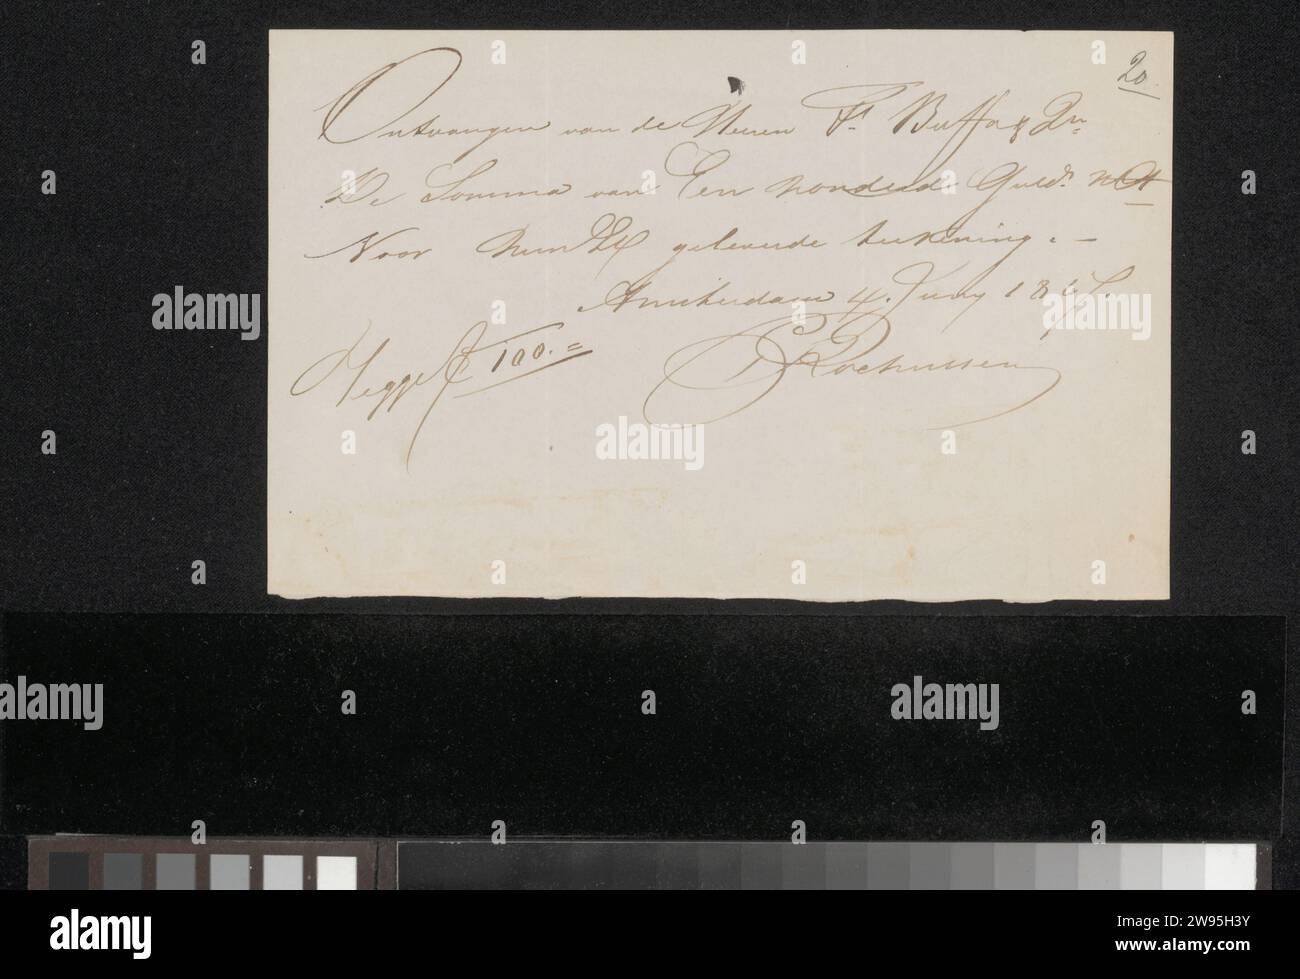 Receipt for Charles Rochussen, Charles Rochussen, 1867   Amsterdam paper. ink writing (processes) / pen money. drawing Stock Photo